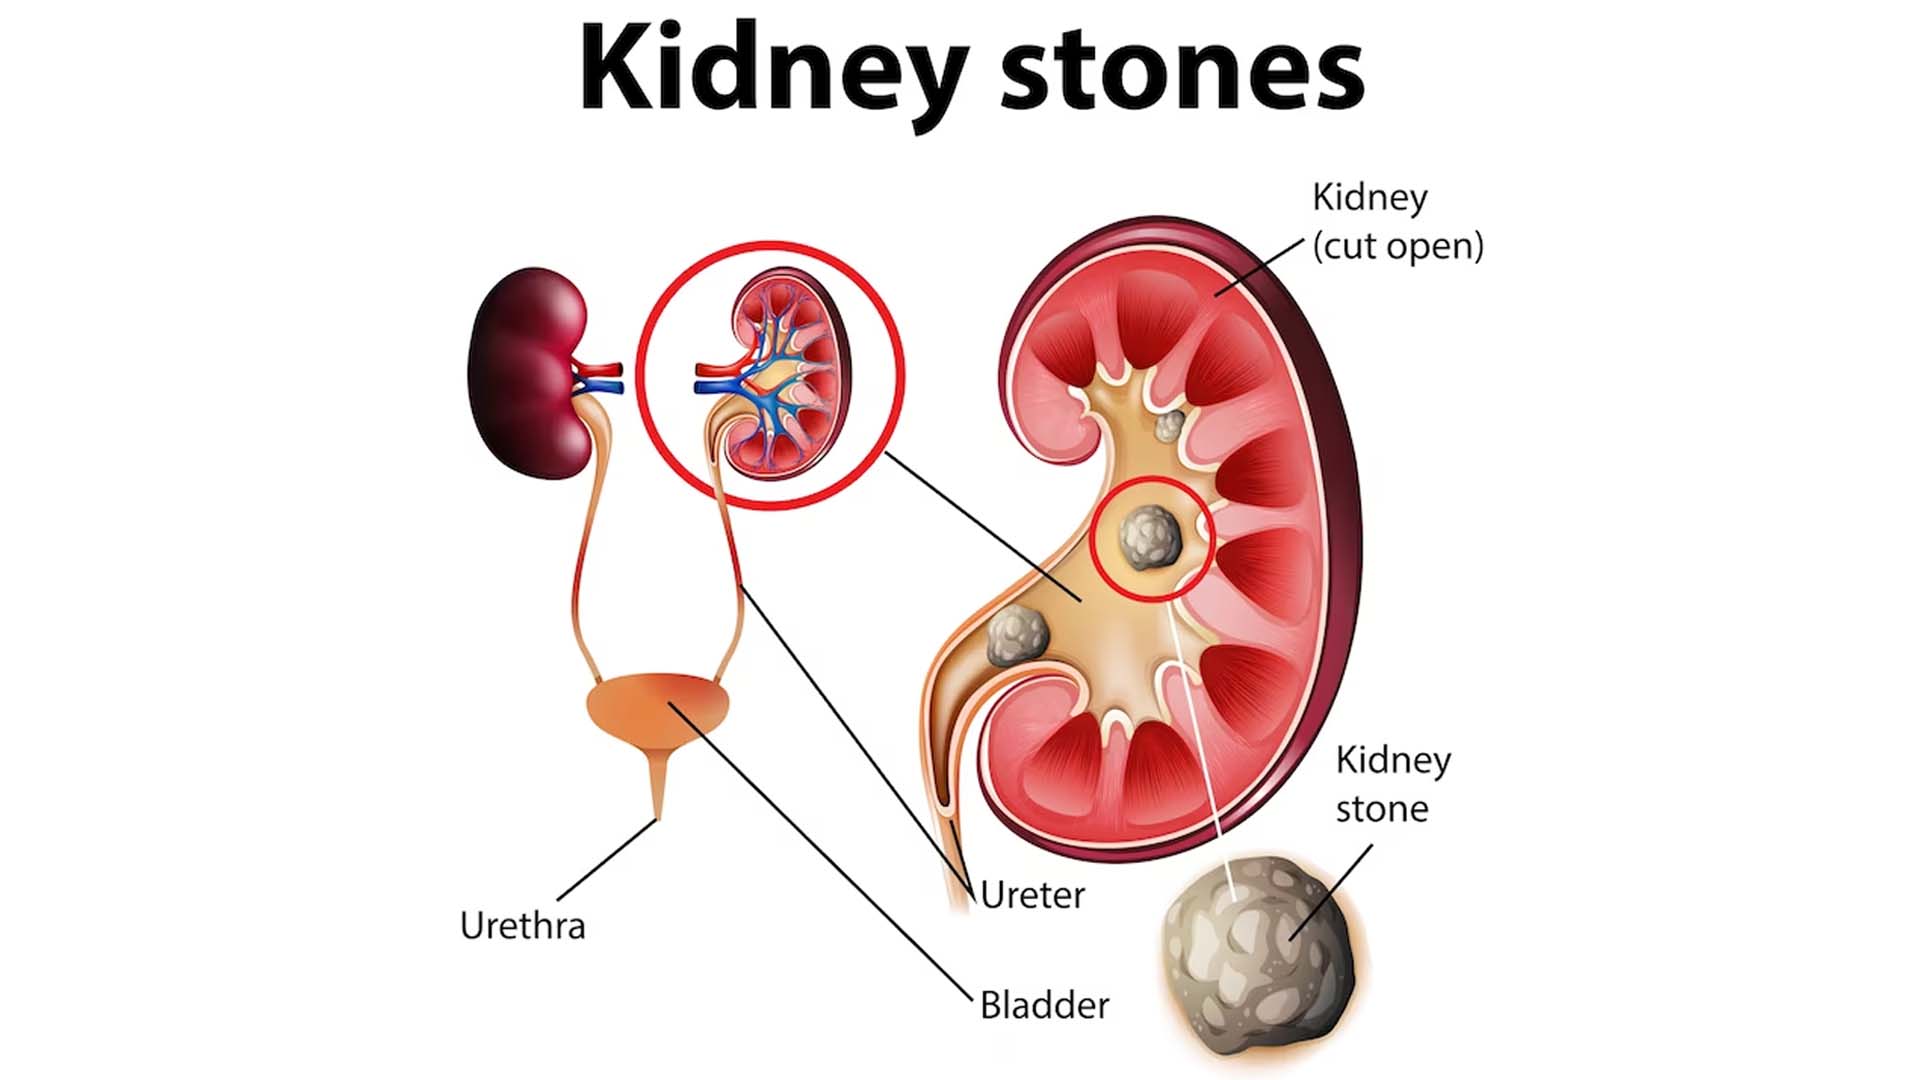 Do Kidney Stones Cause Back Pain?